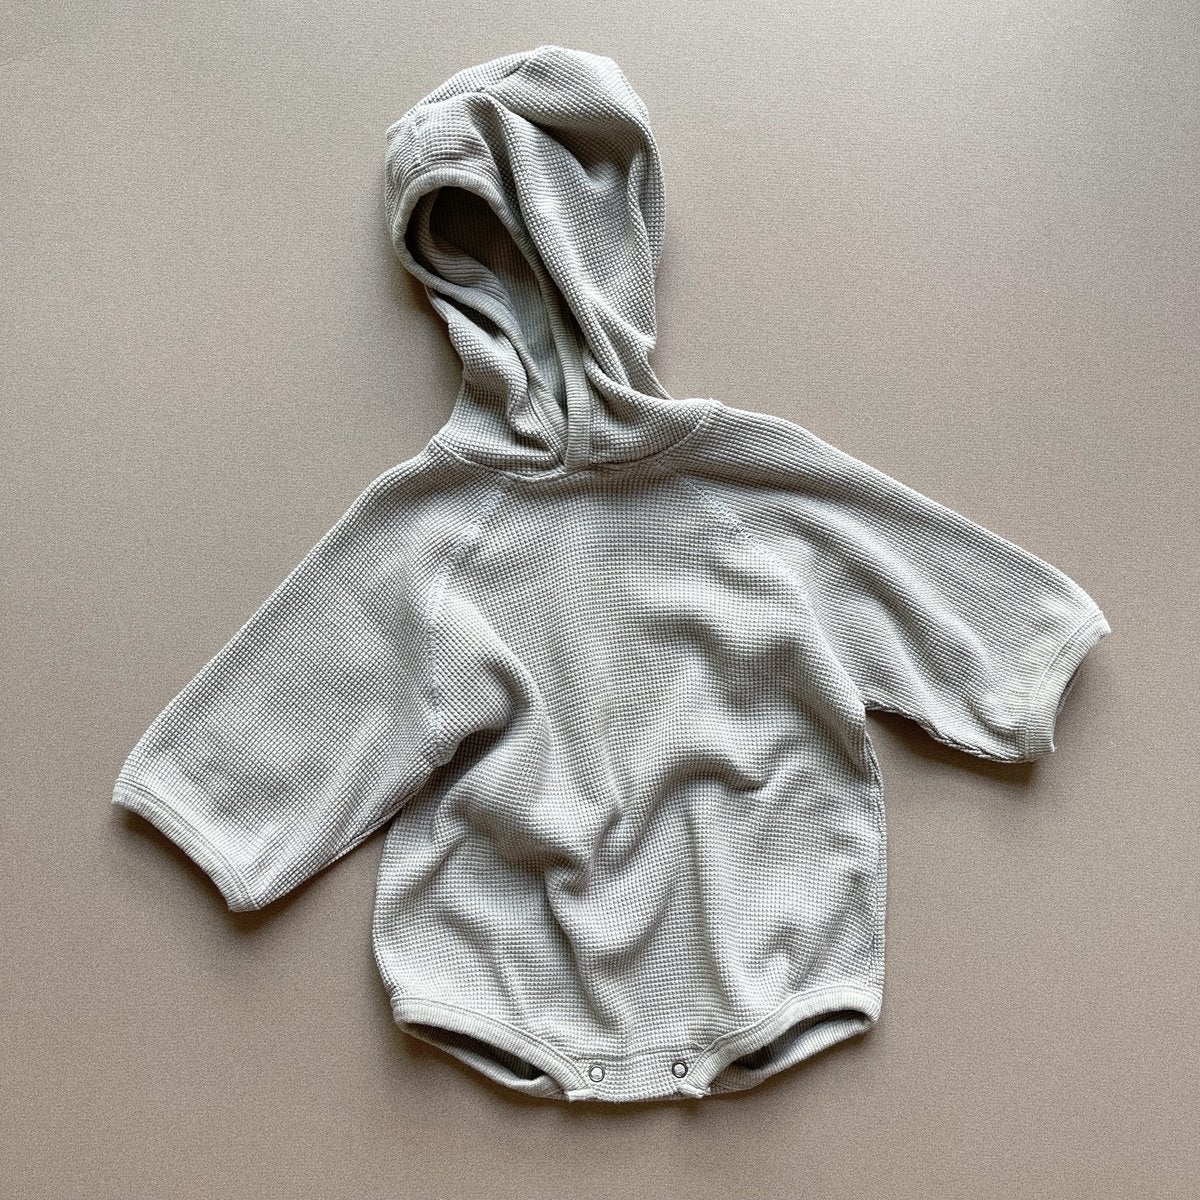 Waffel Hoody Bodysuit find Stylish Fashion for Little People- at Little Foxx Concept Store